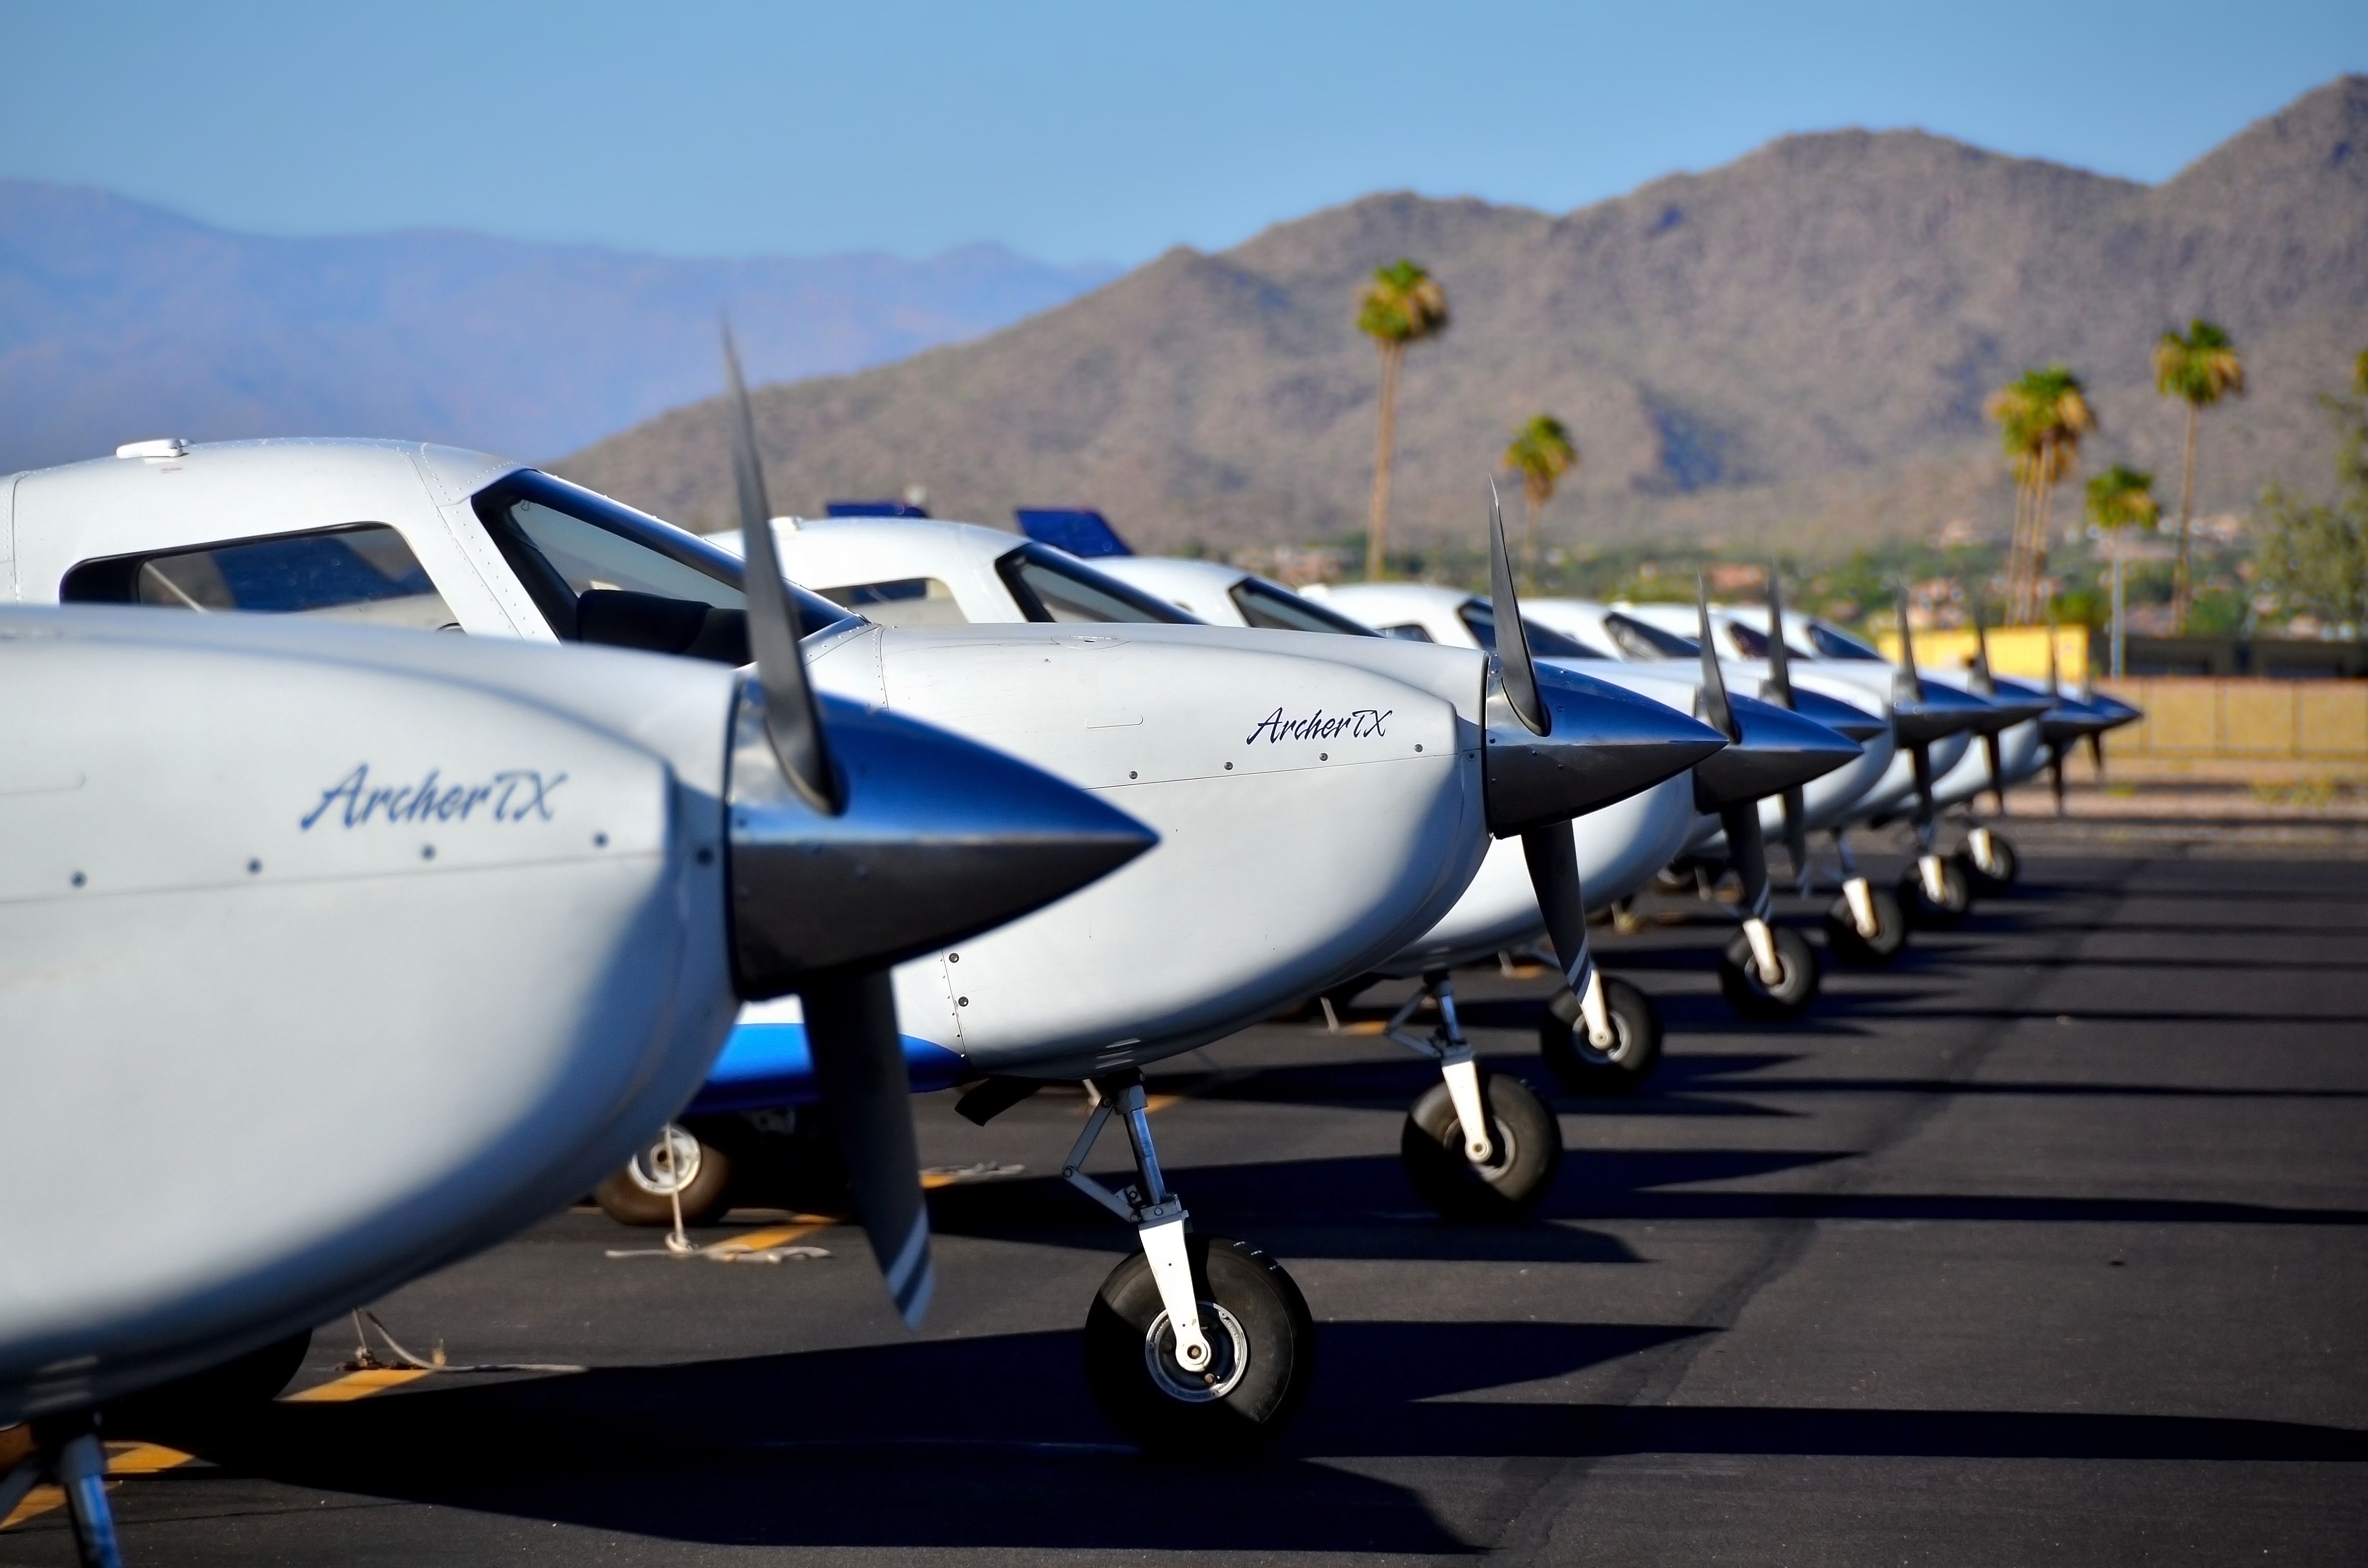 A fleet of Piper PA-28 Archers at CAE Oxford Aviation Academy in Mesa, AZ.